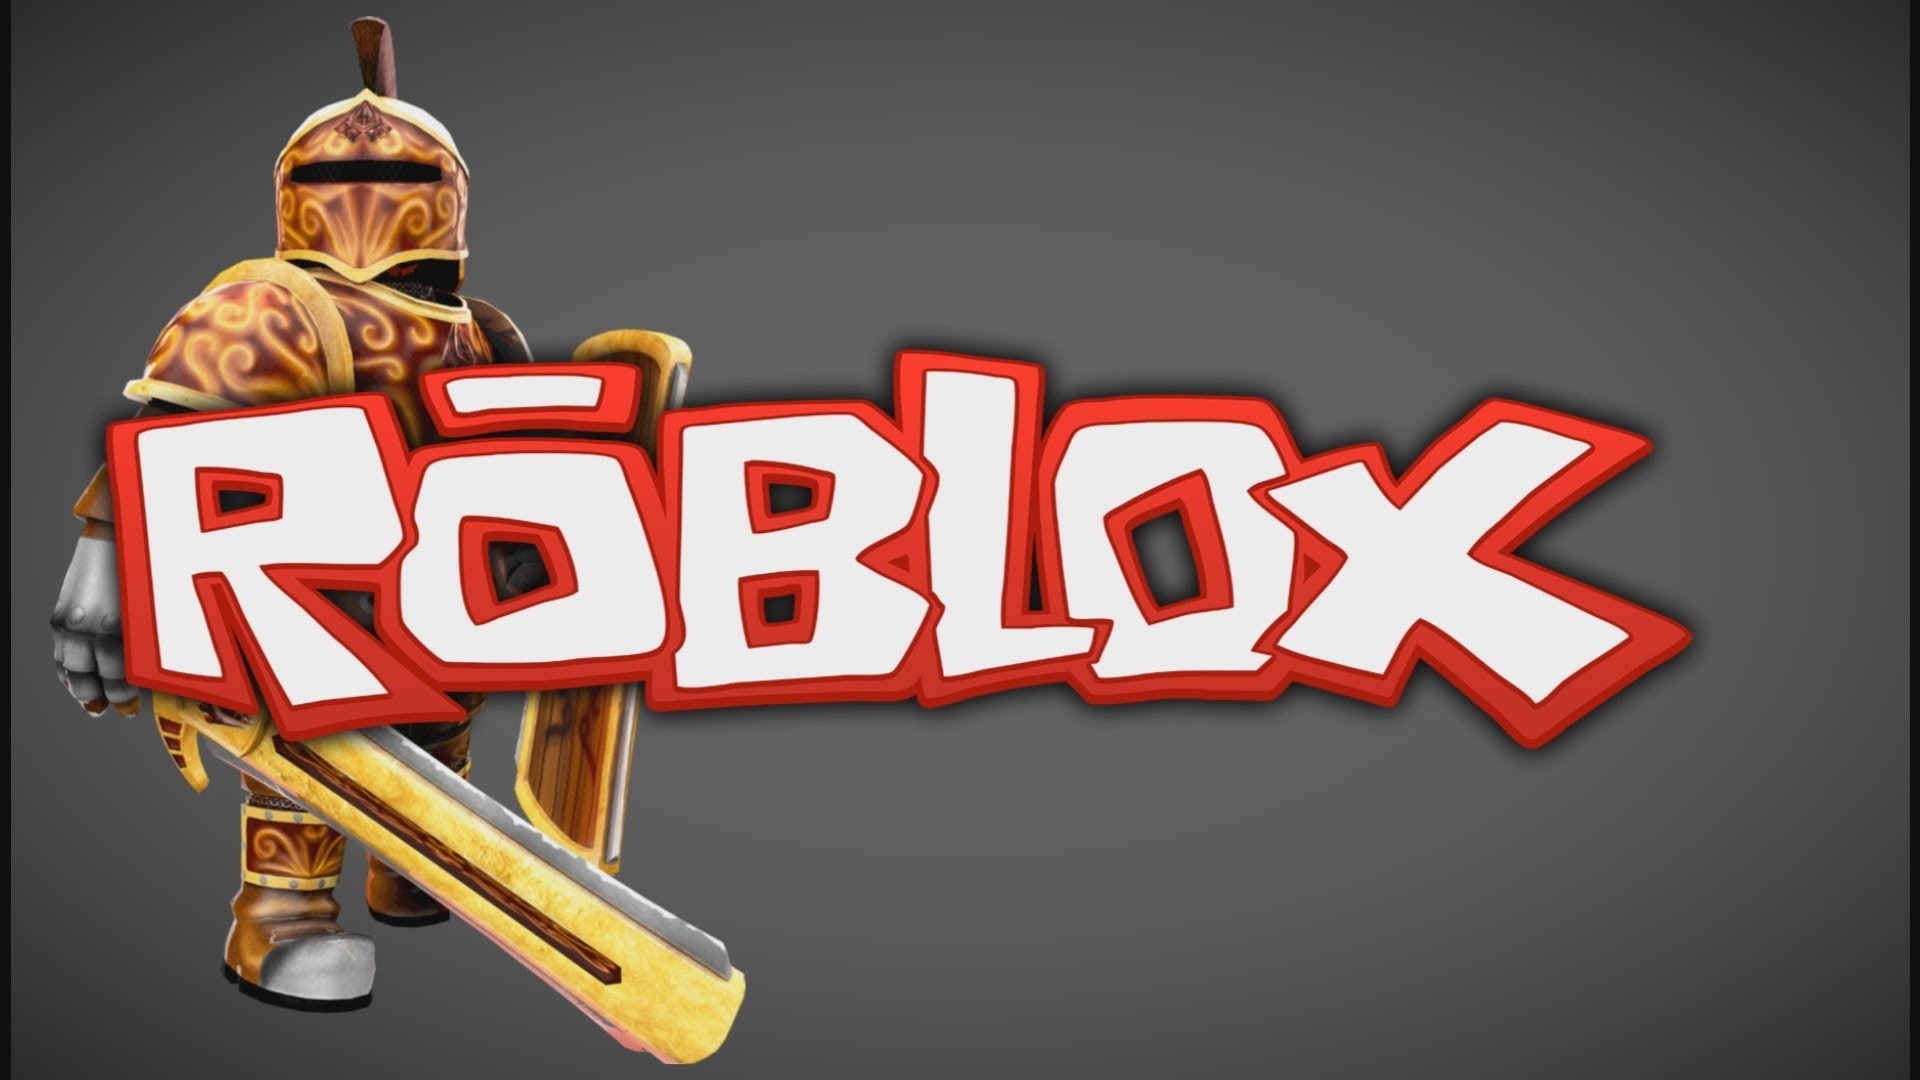 Cool Wallpapers Roblox Roblox Wallpapers Wallpaper Cave Download For Free On All Your Devices Computer Smartphone Or Tablet Kumpulan Alamat Grapari Telkomsel Dan Alamat Bank - roblox wallpaper for phone